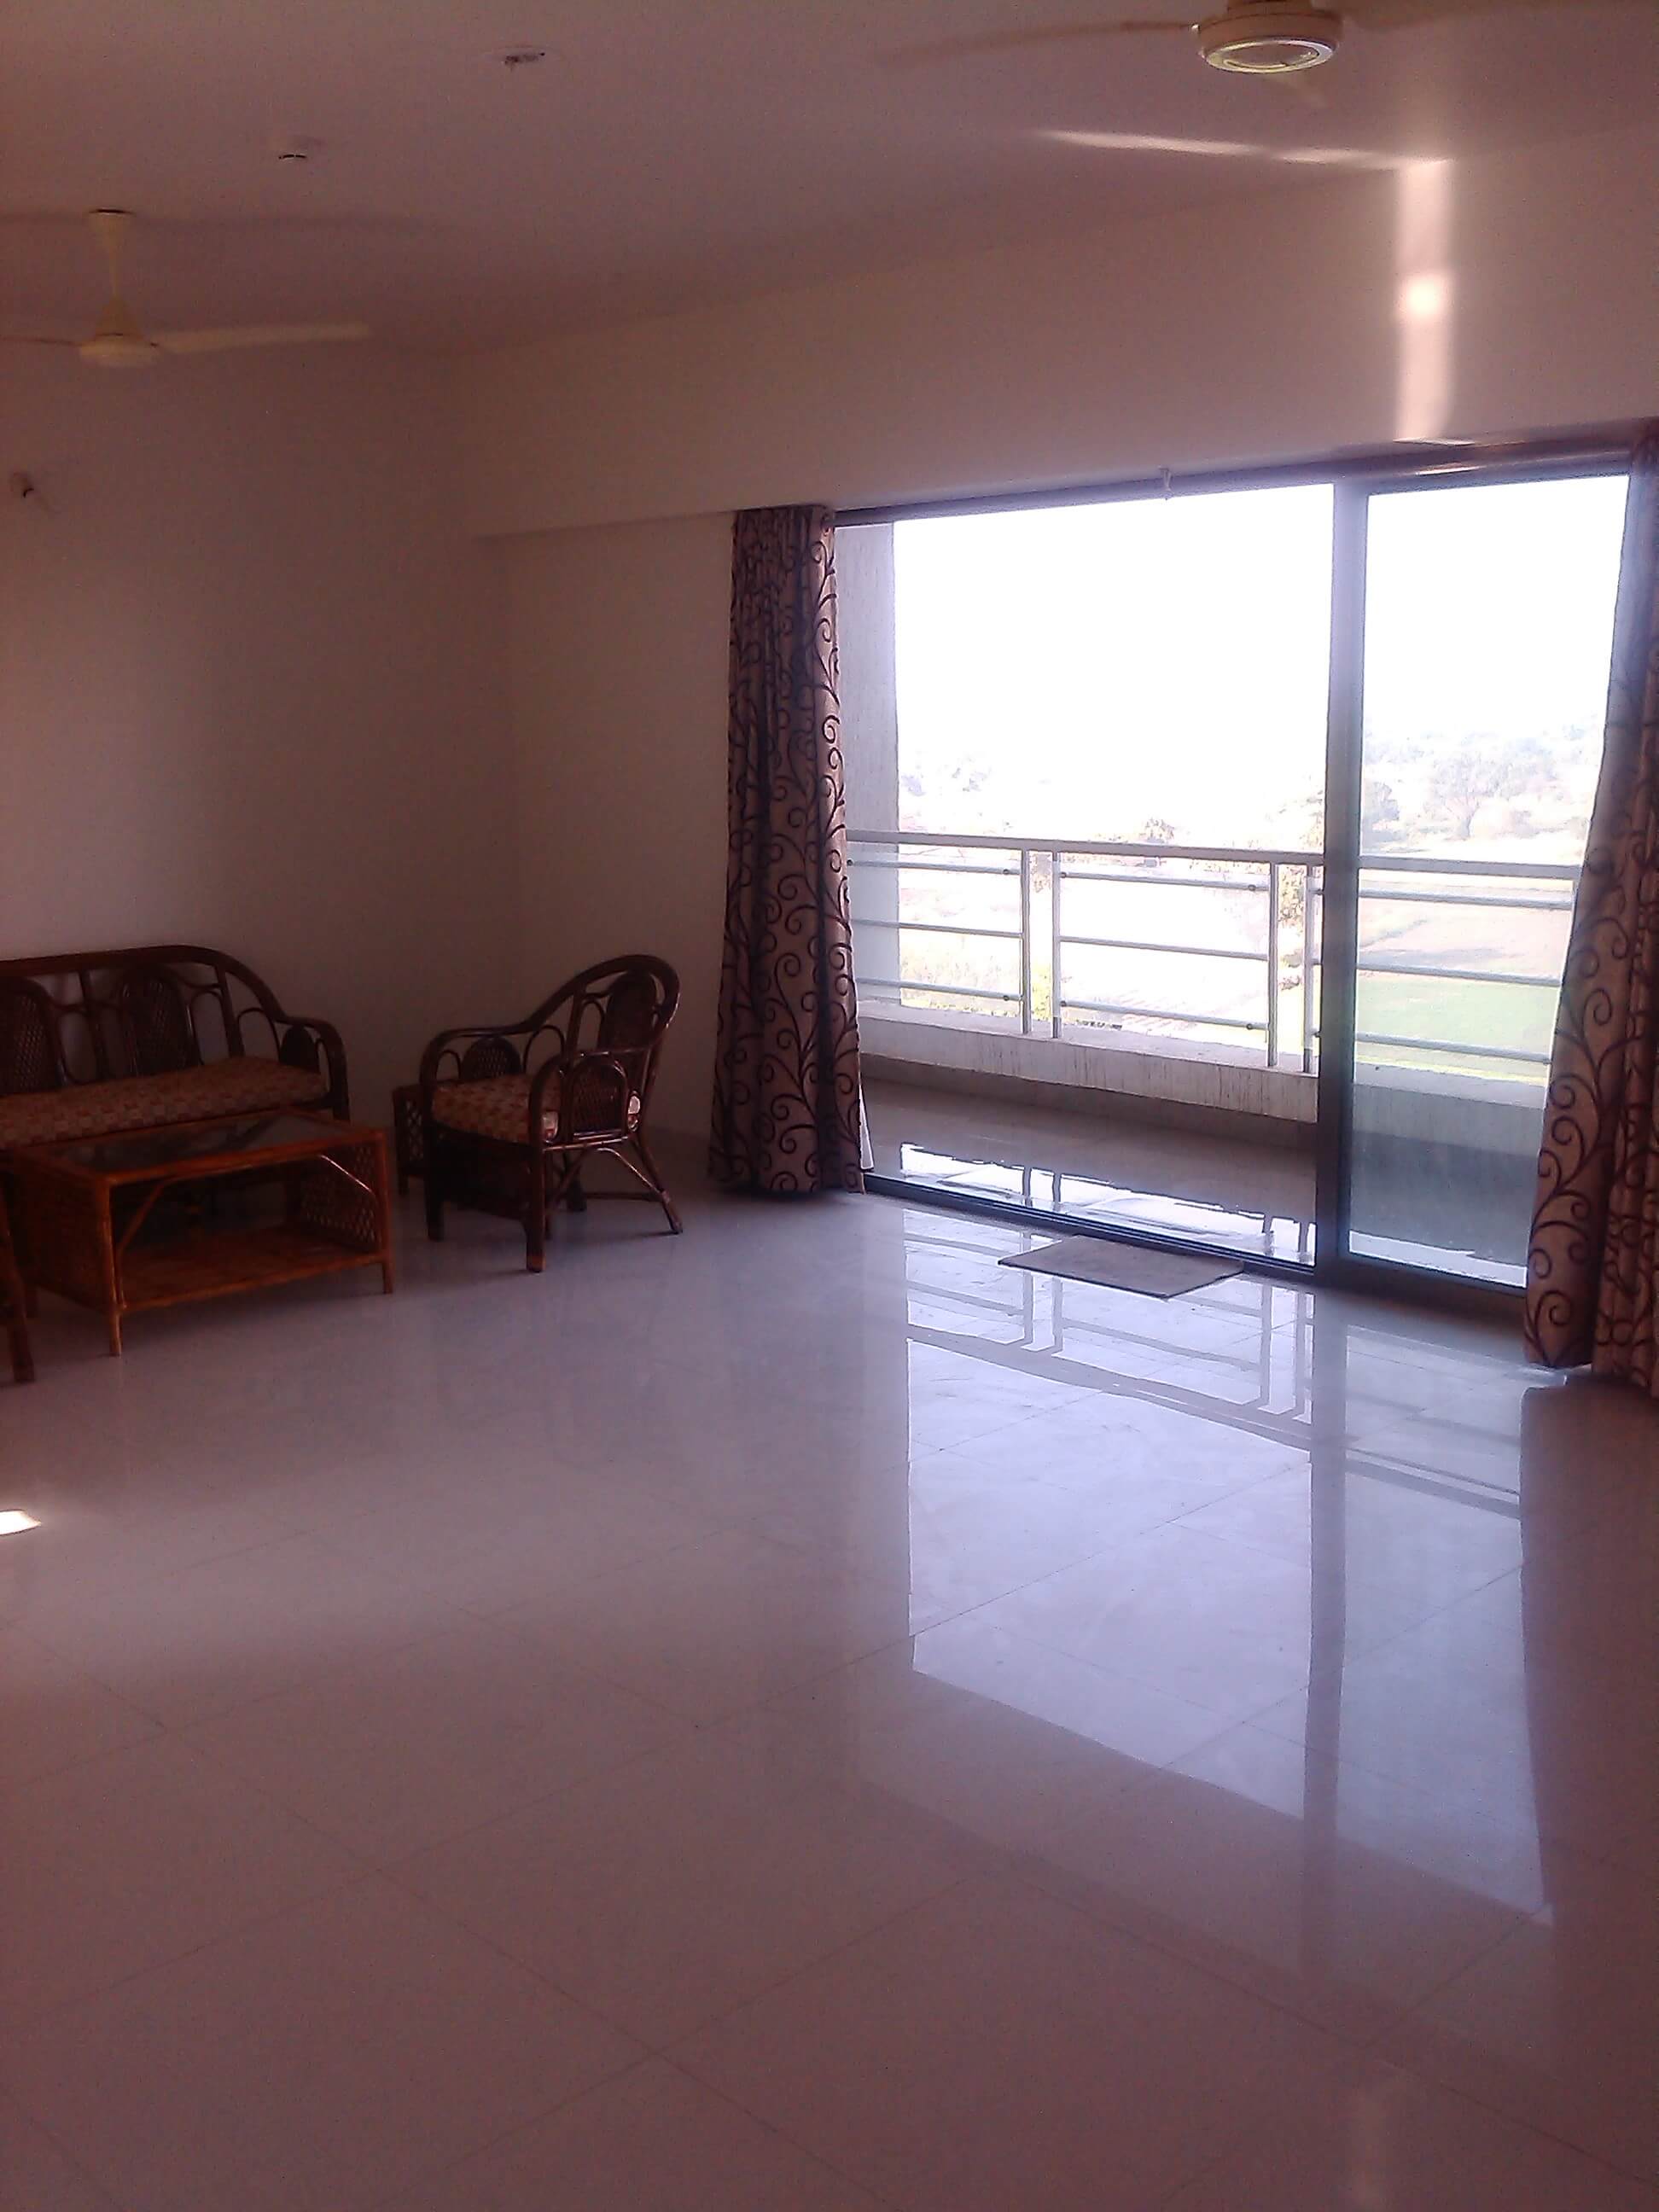 Spacious, Lavish & Ultra-modern Flat with nature around. Buy this premium property to settle down.